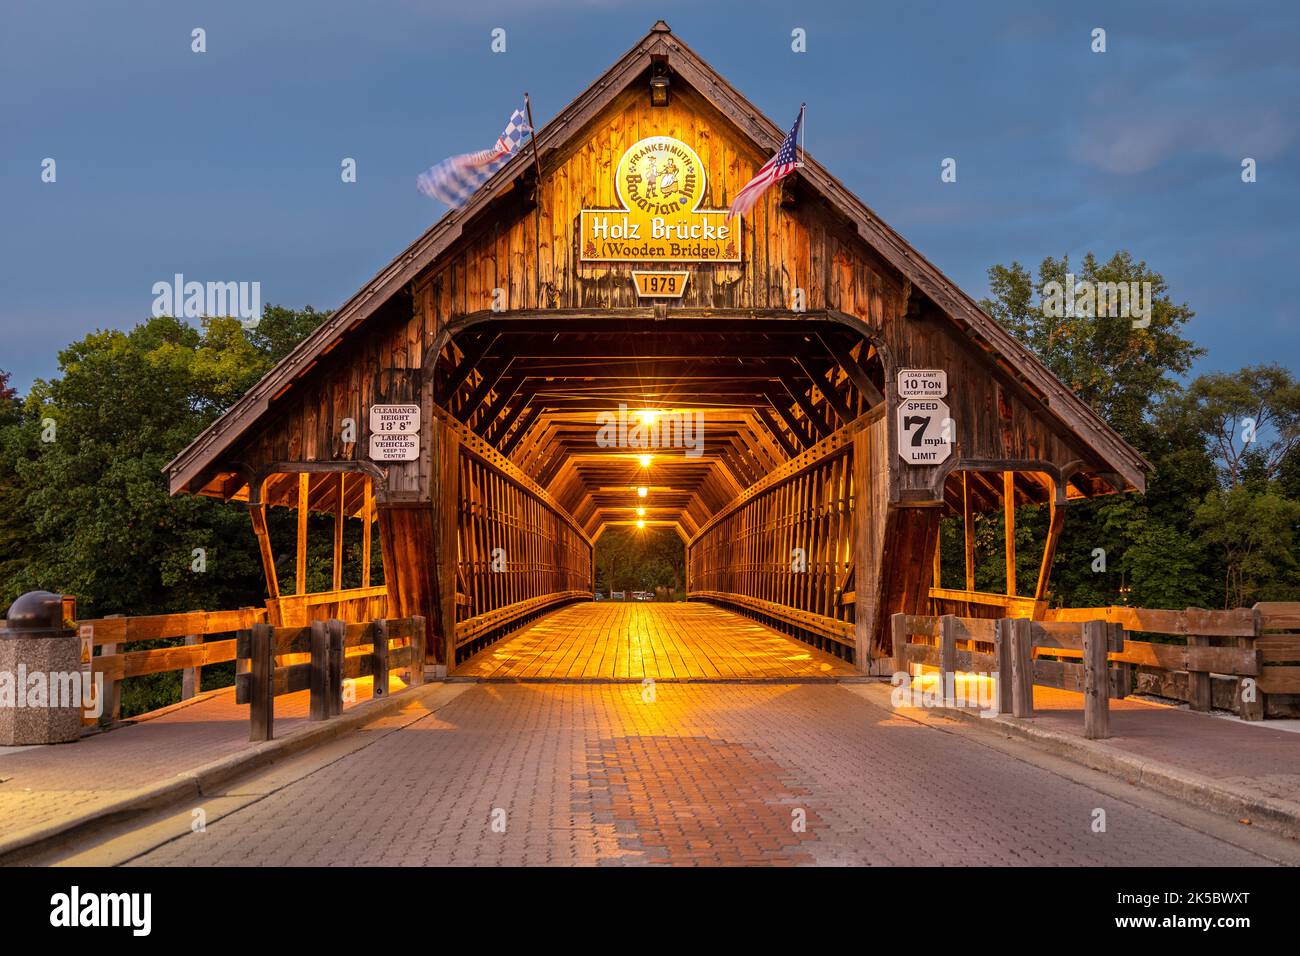 Frankenmuth Wooden Covered Bridge At Night, Holz Brucke Built By The Bavarian Inn Crossing The Cass River  In The Bavarian Town Of frankenmuth In Mich Stock Photo